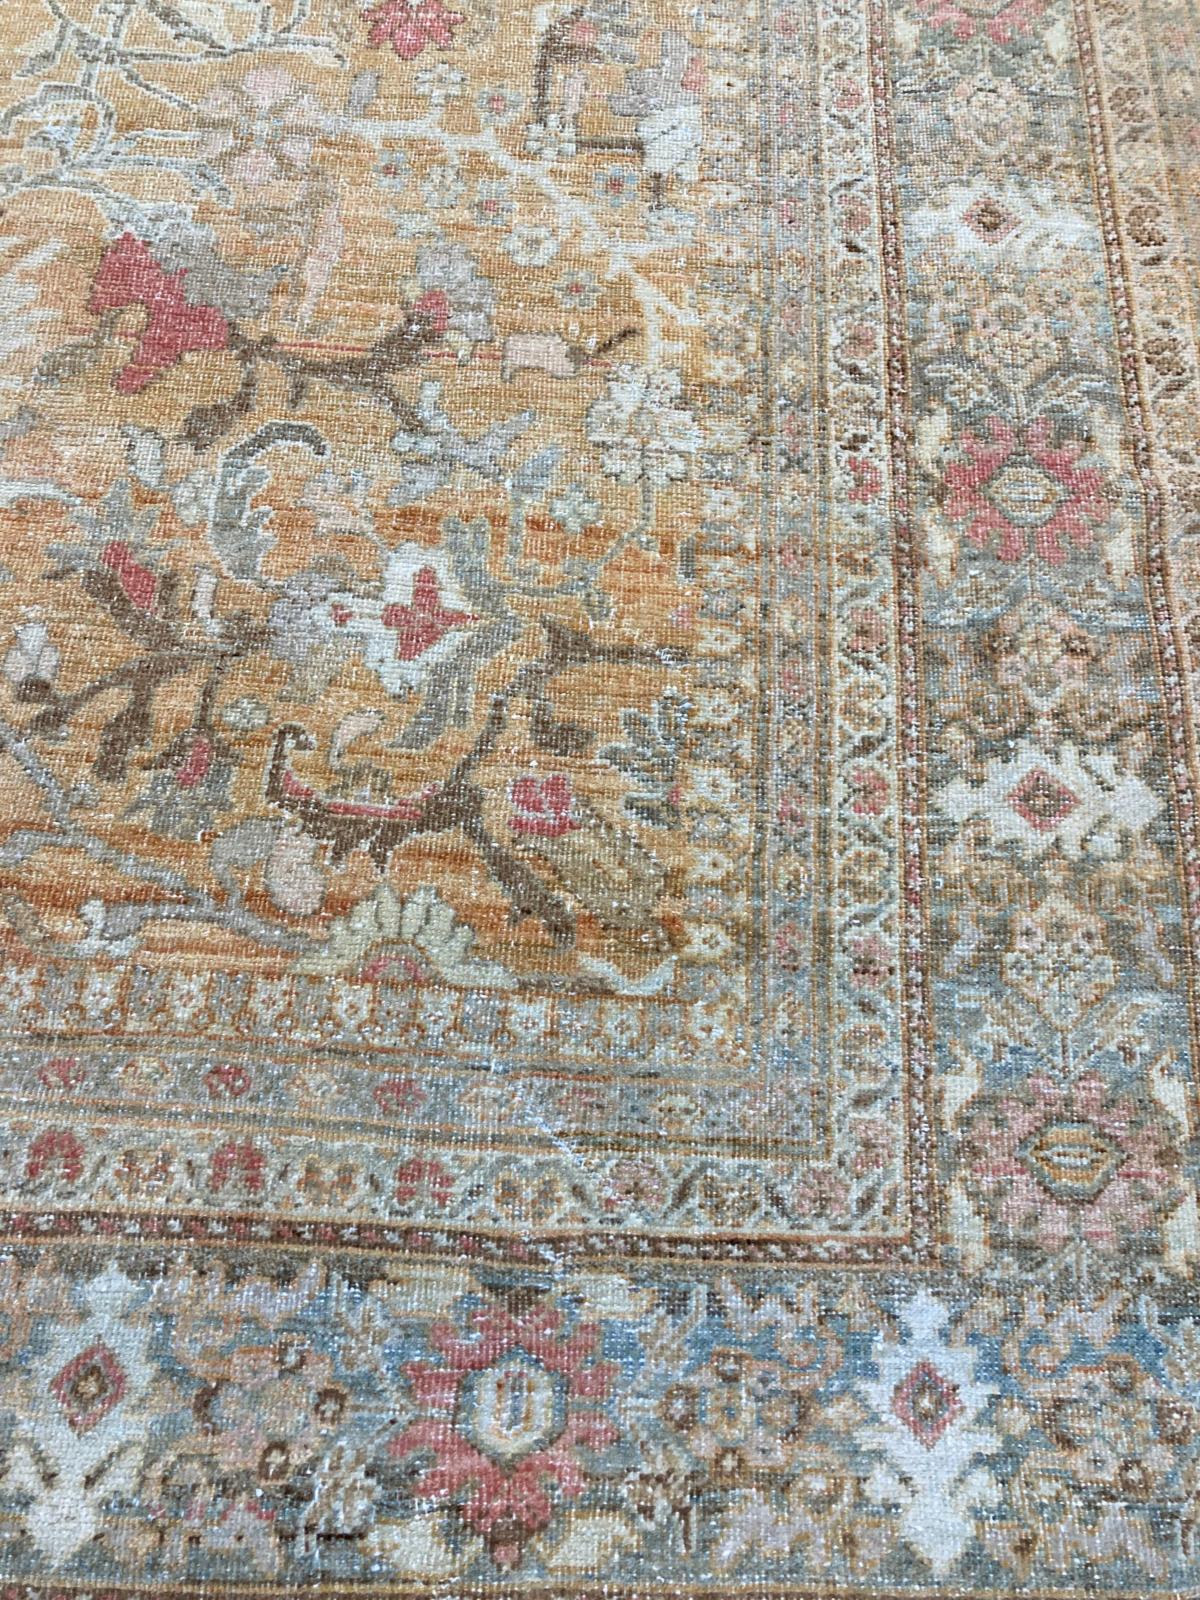 Circa: 1920’s

Dimensions: 12’8 x 17′

Material: 100% Wool Pile, Hand Knotted

Design: Persian, Mahal Weave, Sultanabad Design

 

17401

 

Persian rugs and carpets of various types were woven in parallel by nomadic tribes in village and town